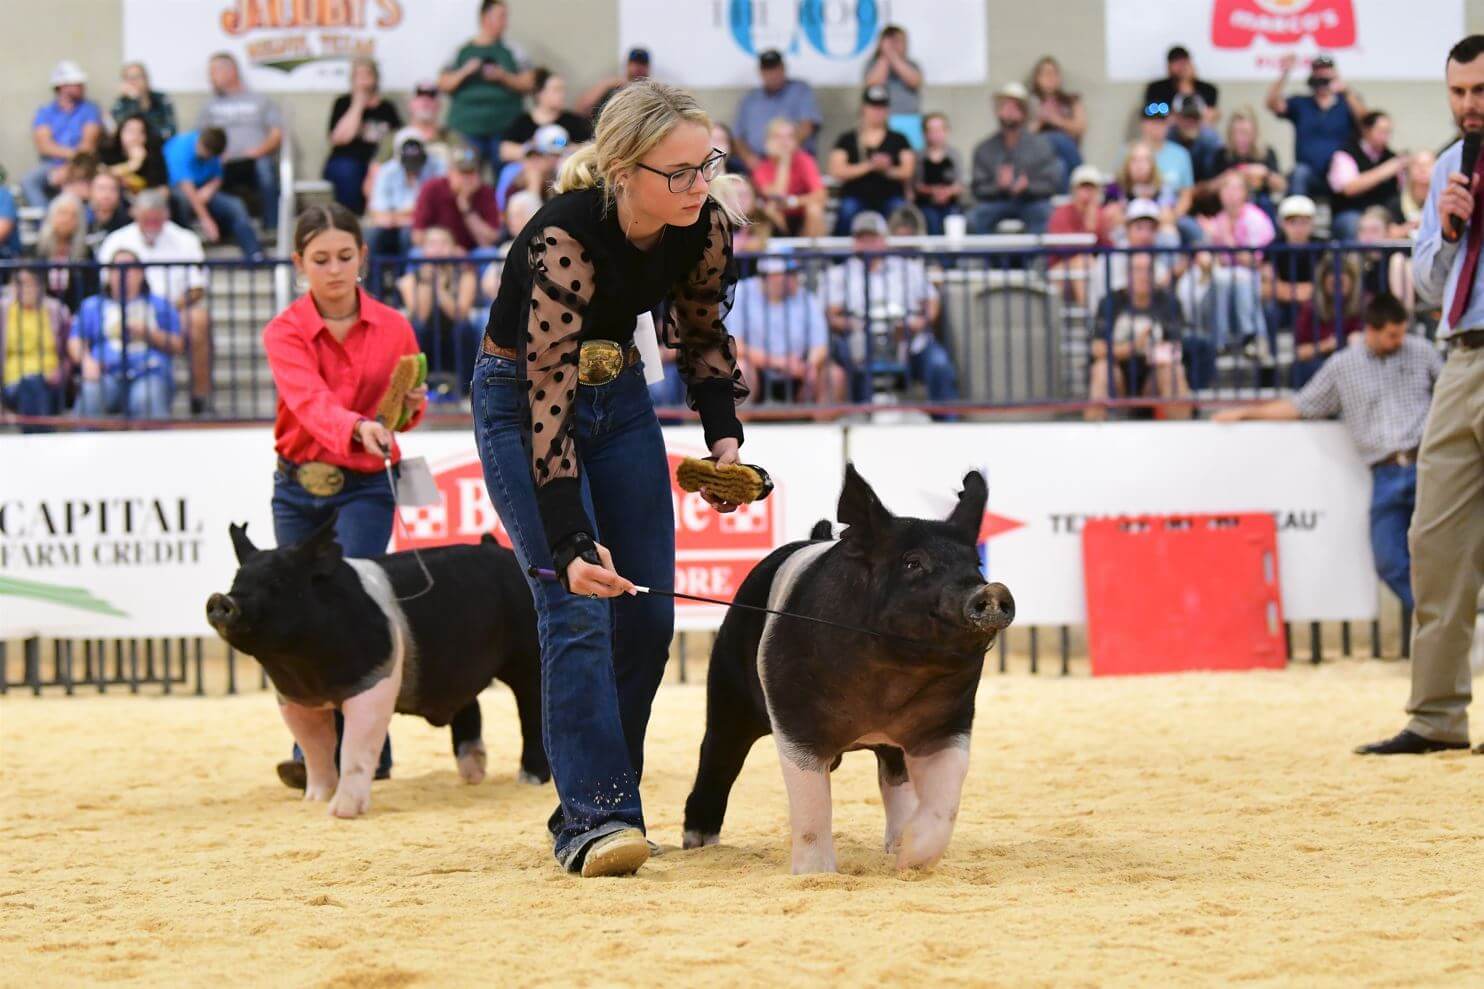 HOt waco fair rodeo livestock show pig sheep ffa 4h extraco event center sullivan lindner moorman jacoby honor show chow feed greatness